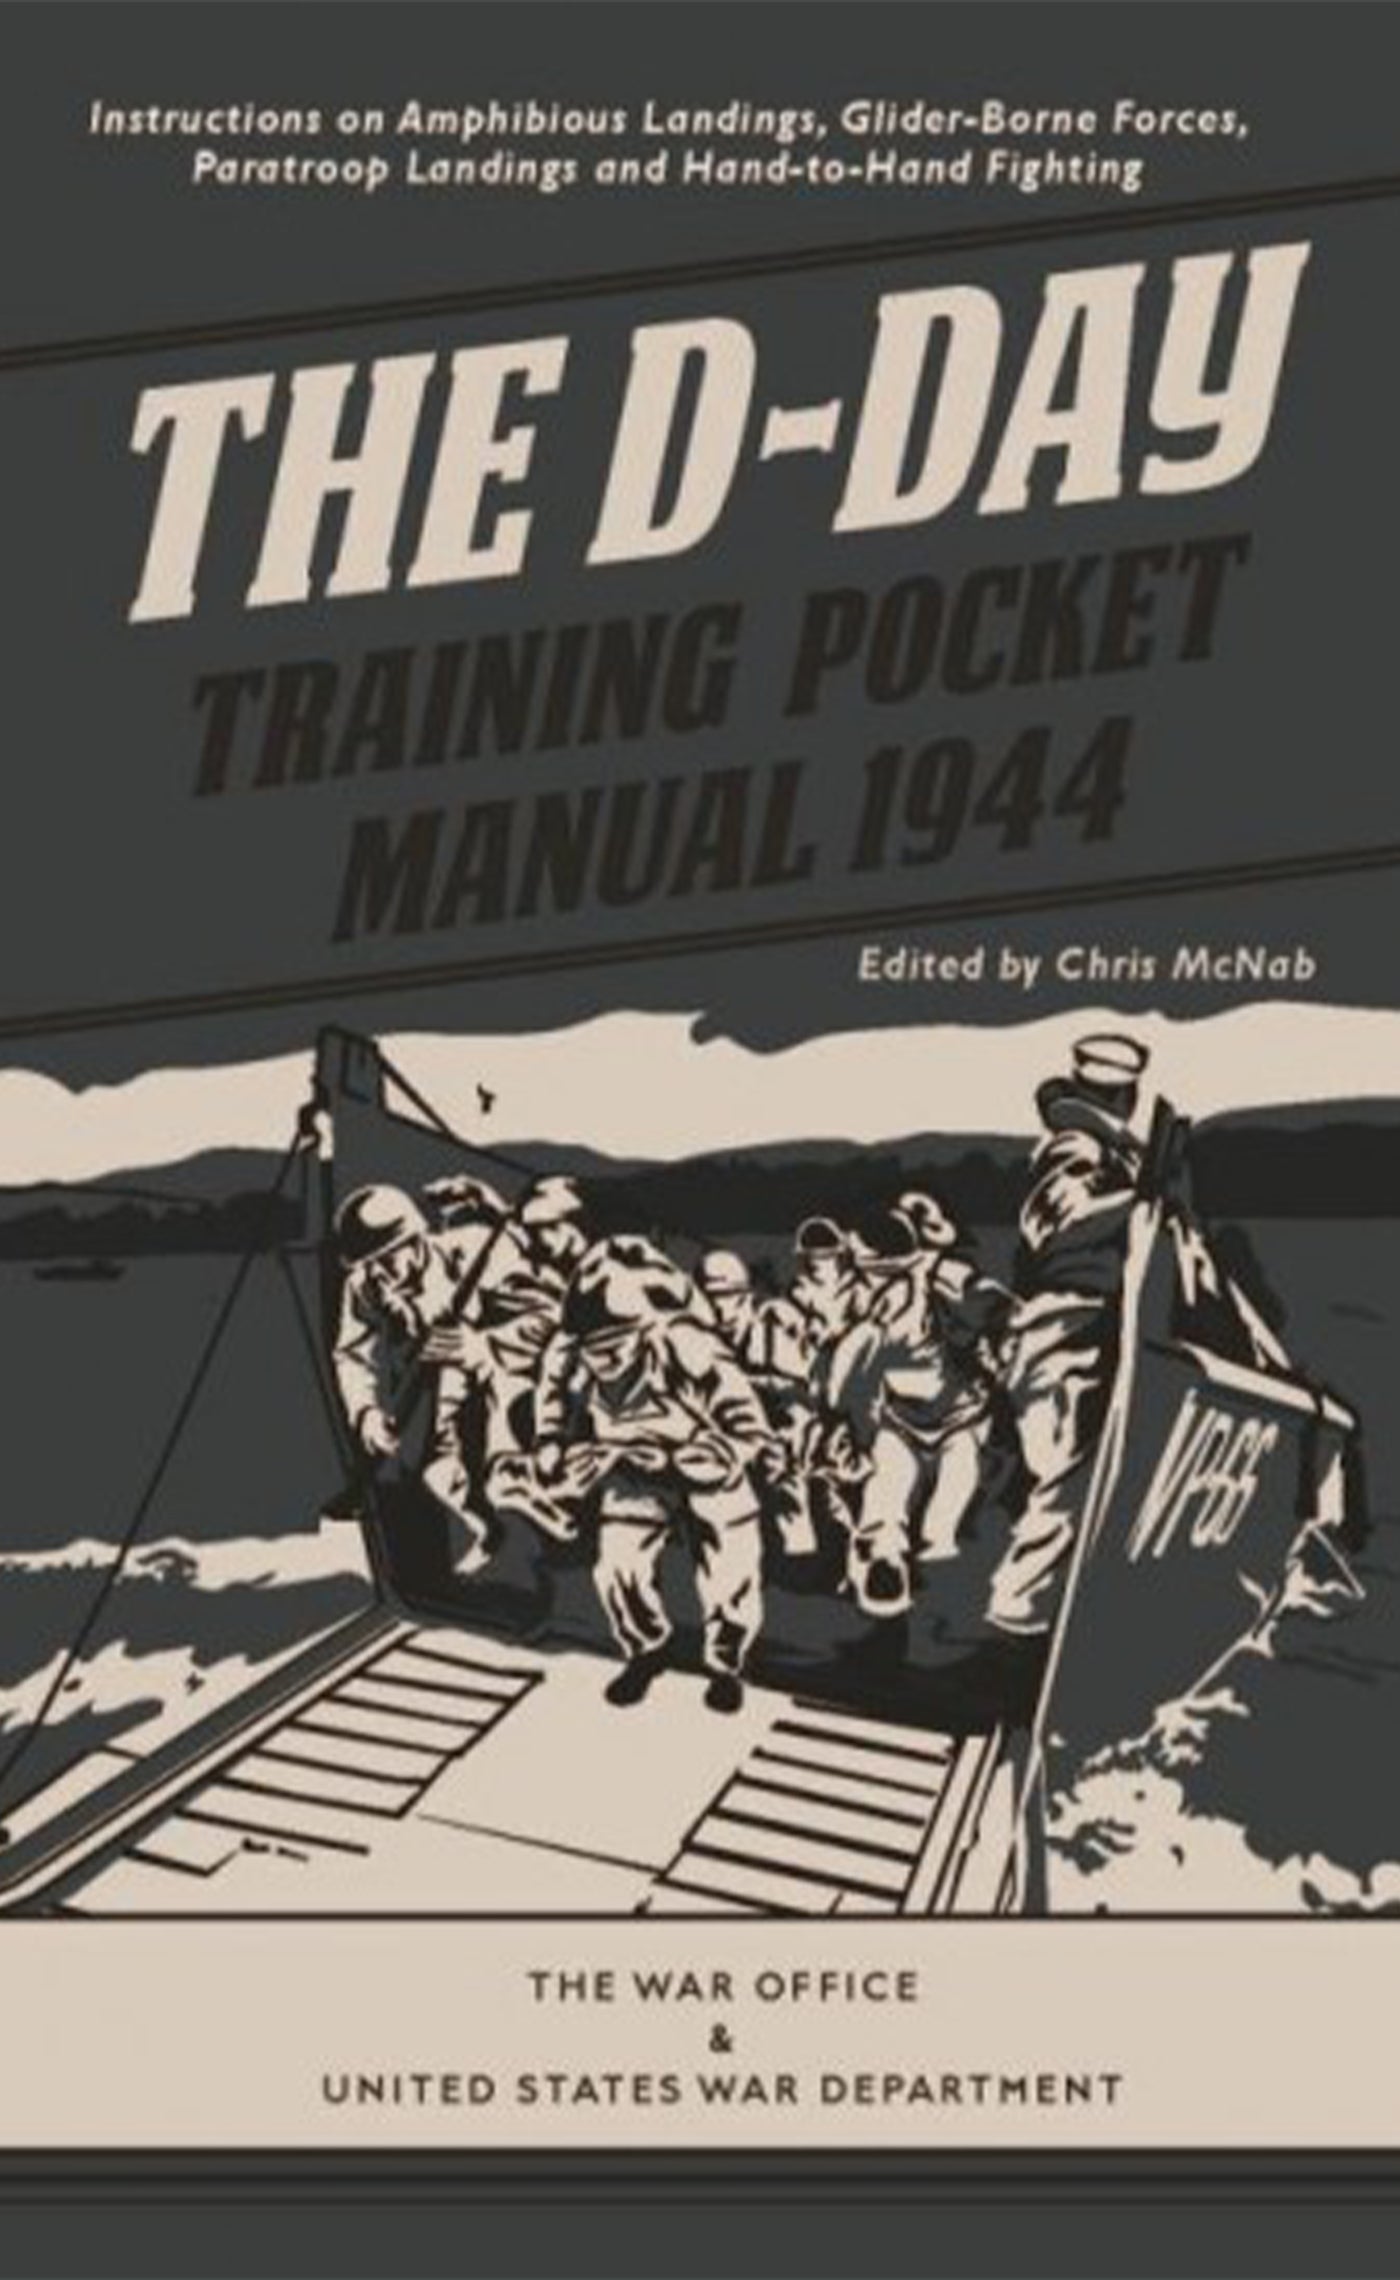 The D-Day Training Pocket Manual 1944